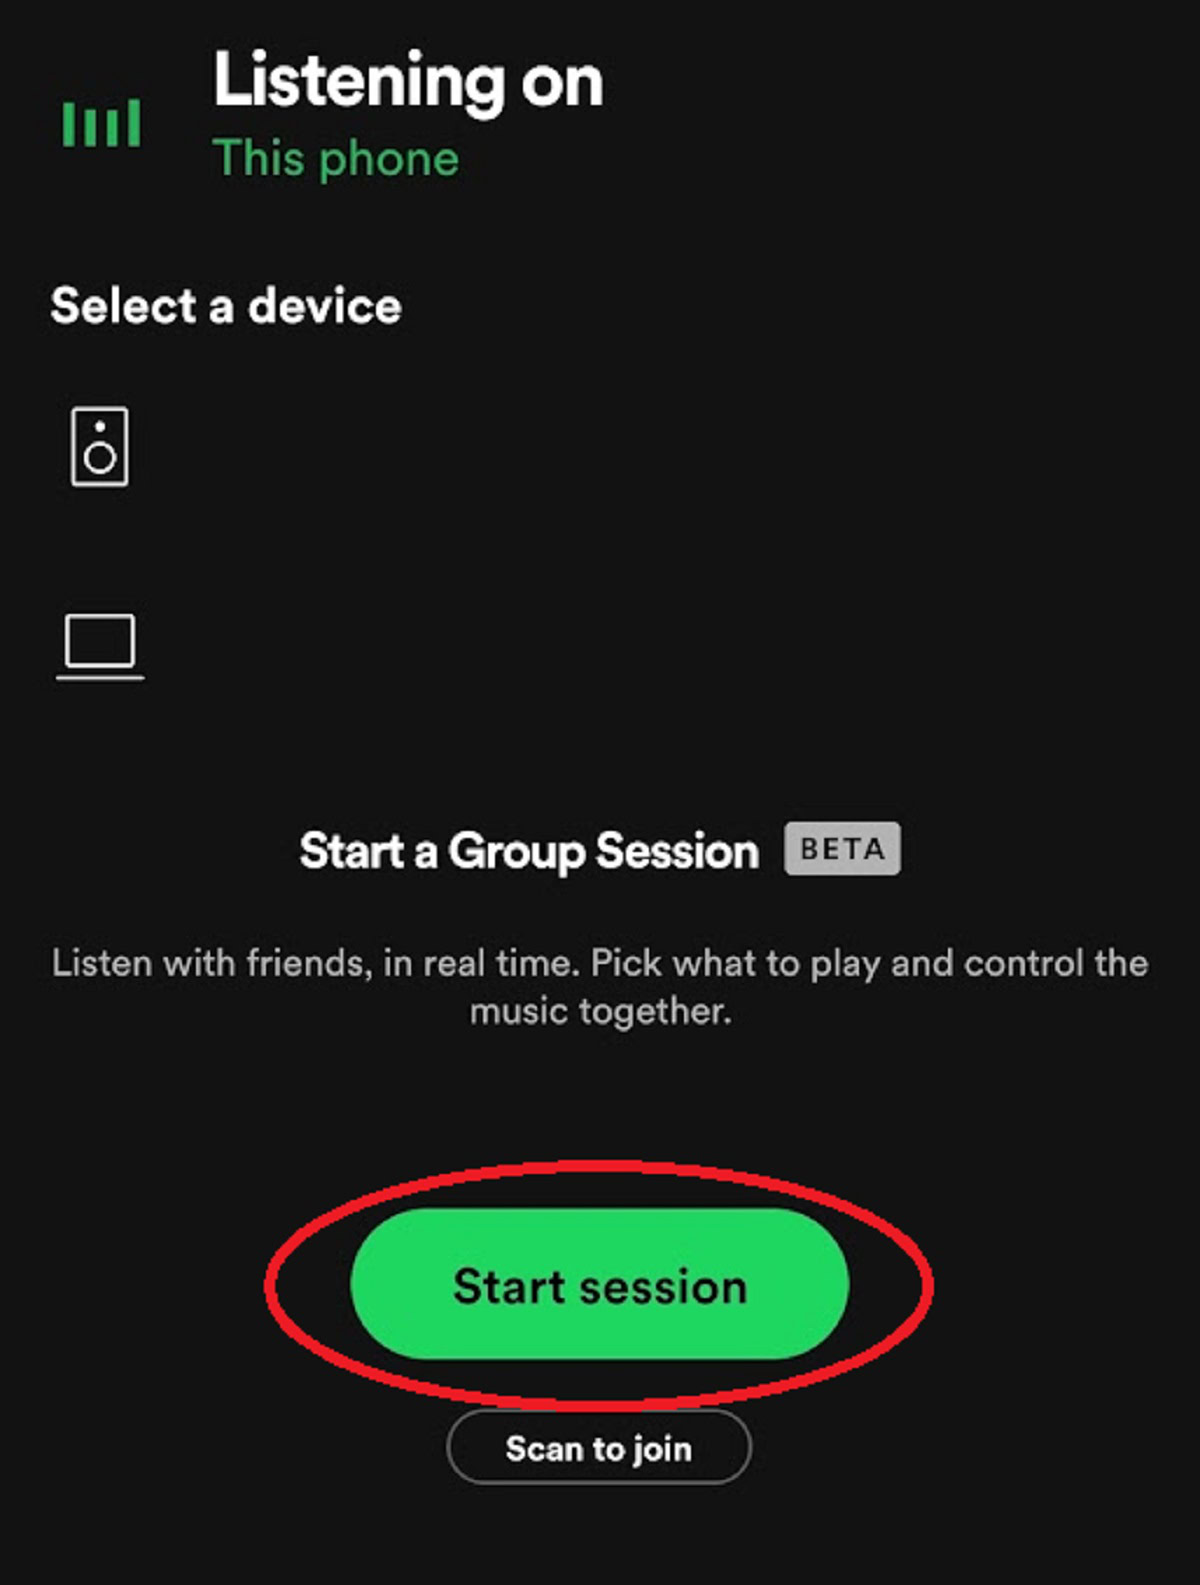 group session spotify screenshot 2